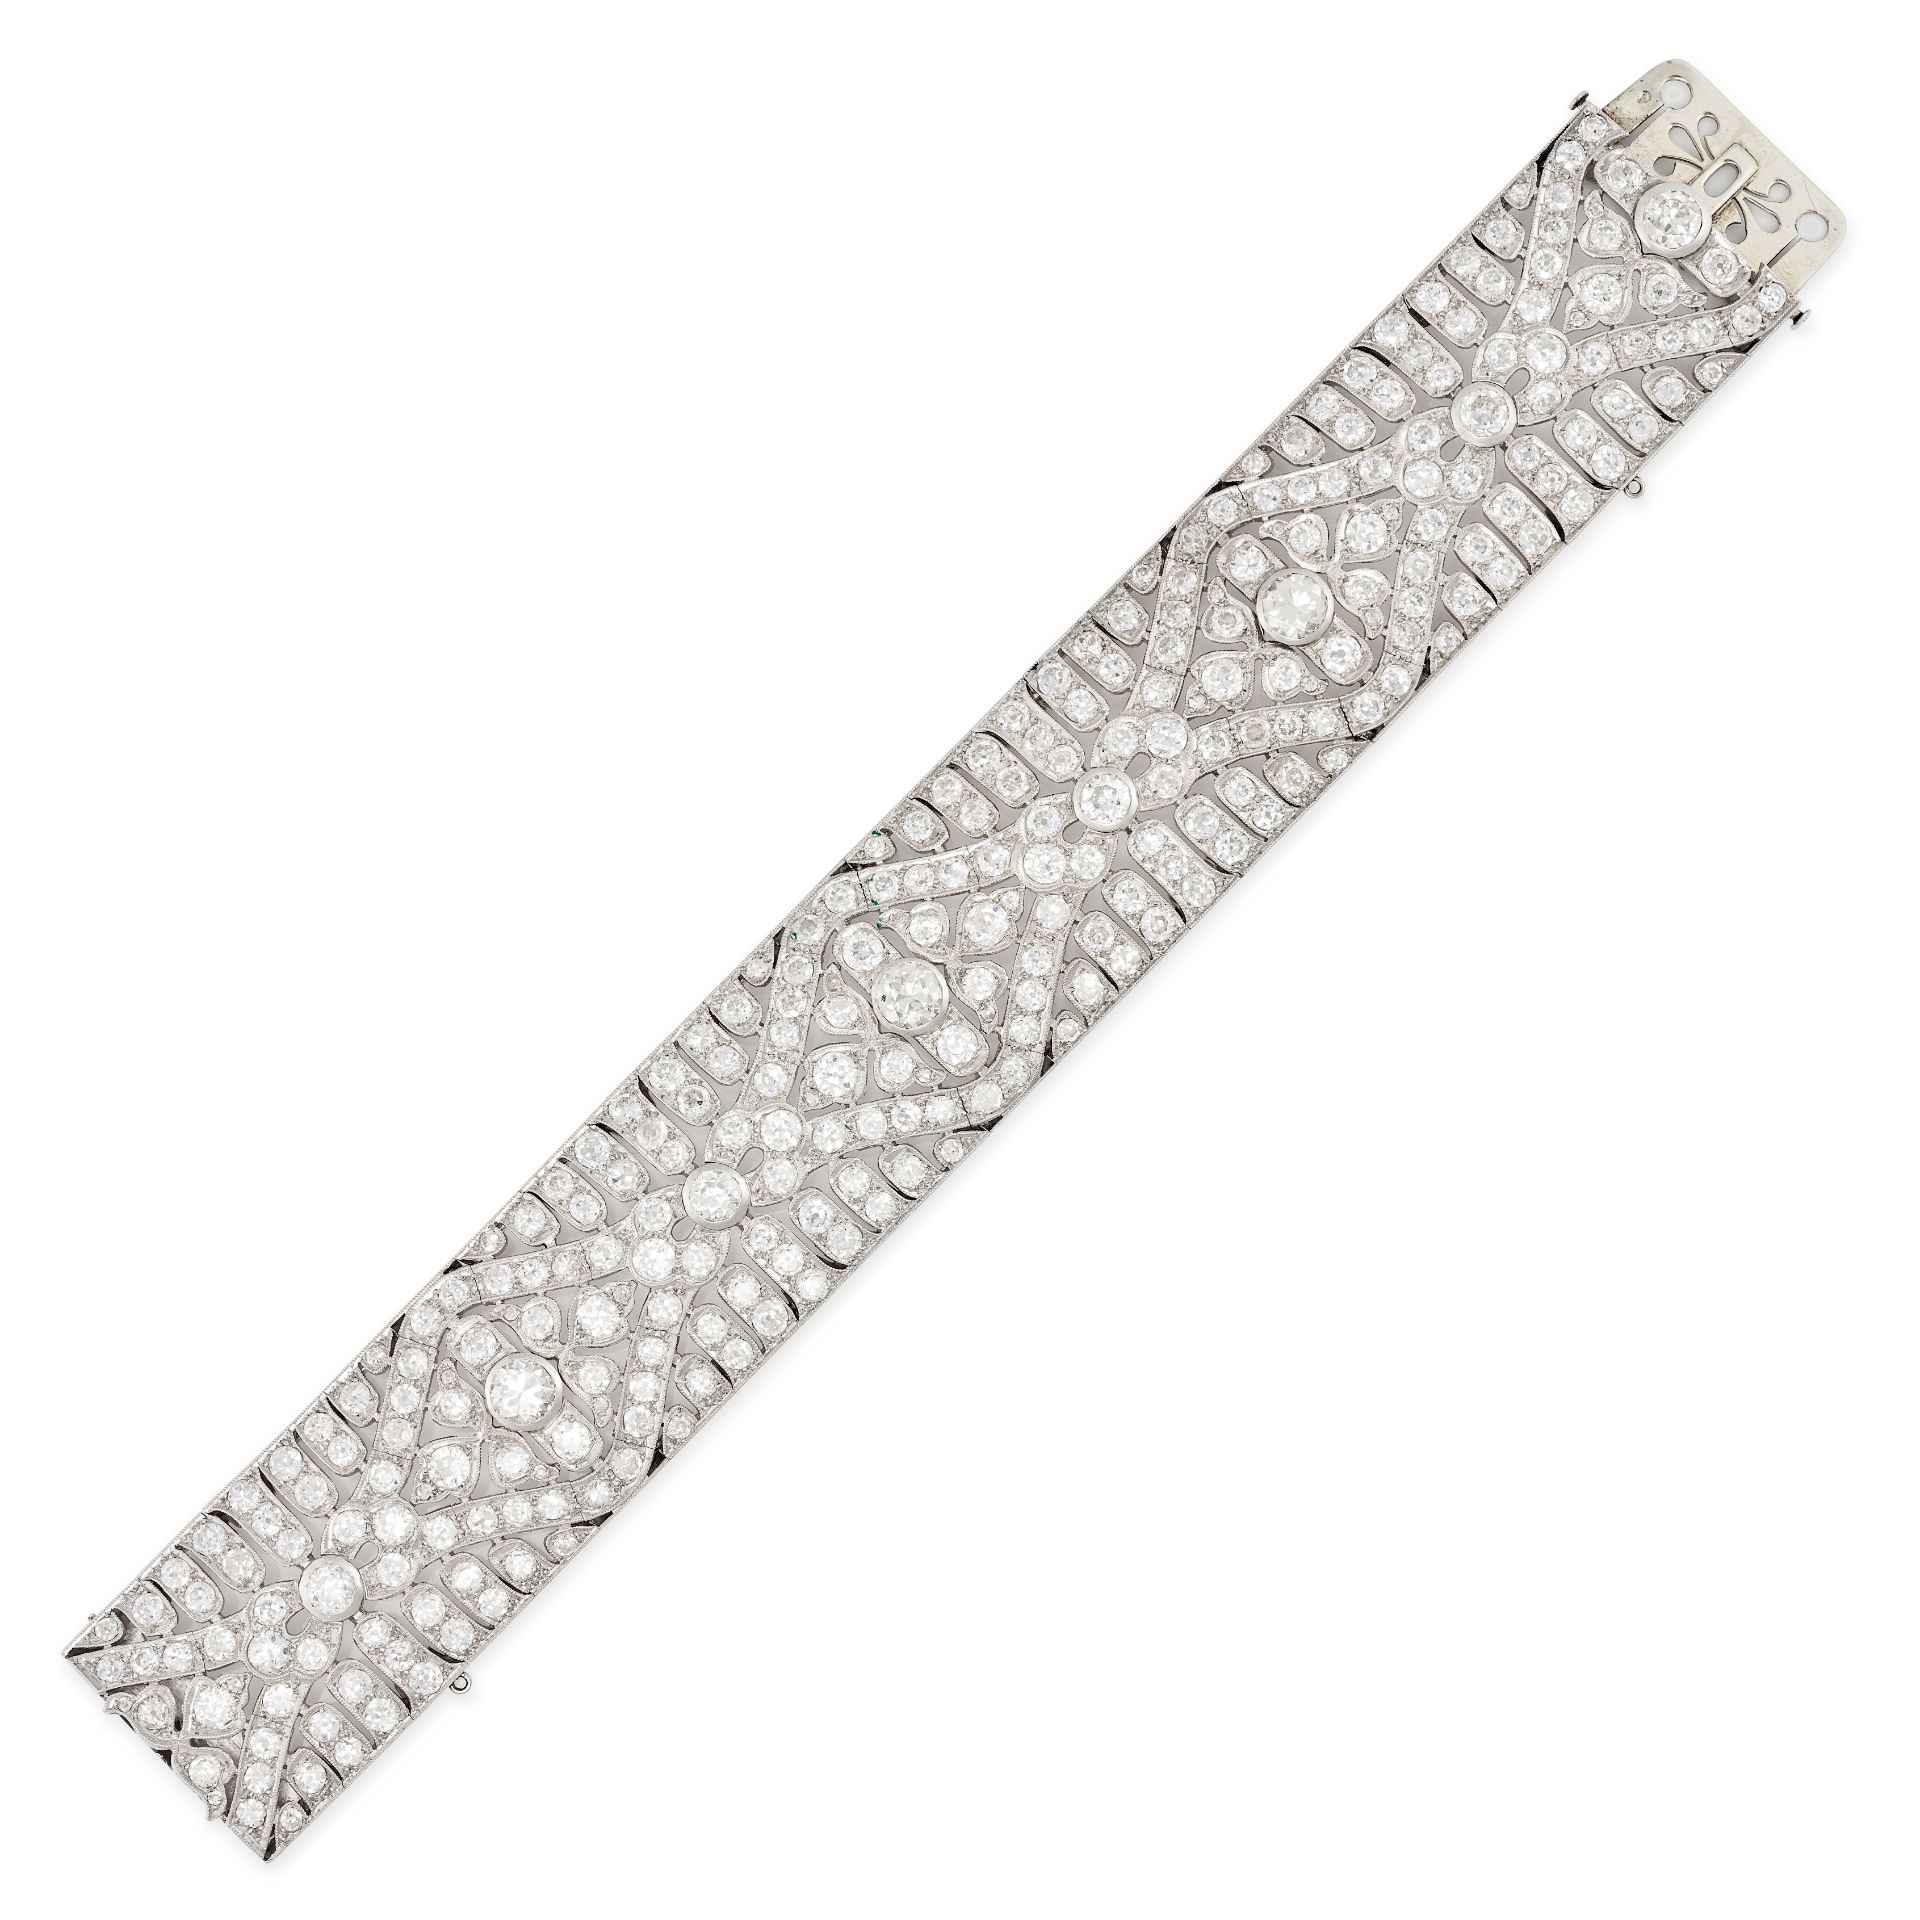 A FINE FRENCH ART DECO DIAMOND BRACELET in 18ct white gold, the openwork bracelet set with four p... - Image 2 of 2